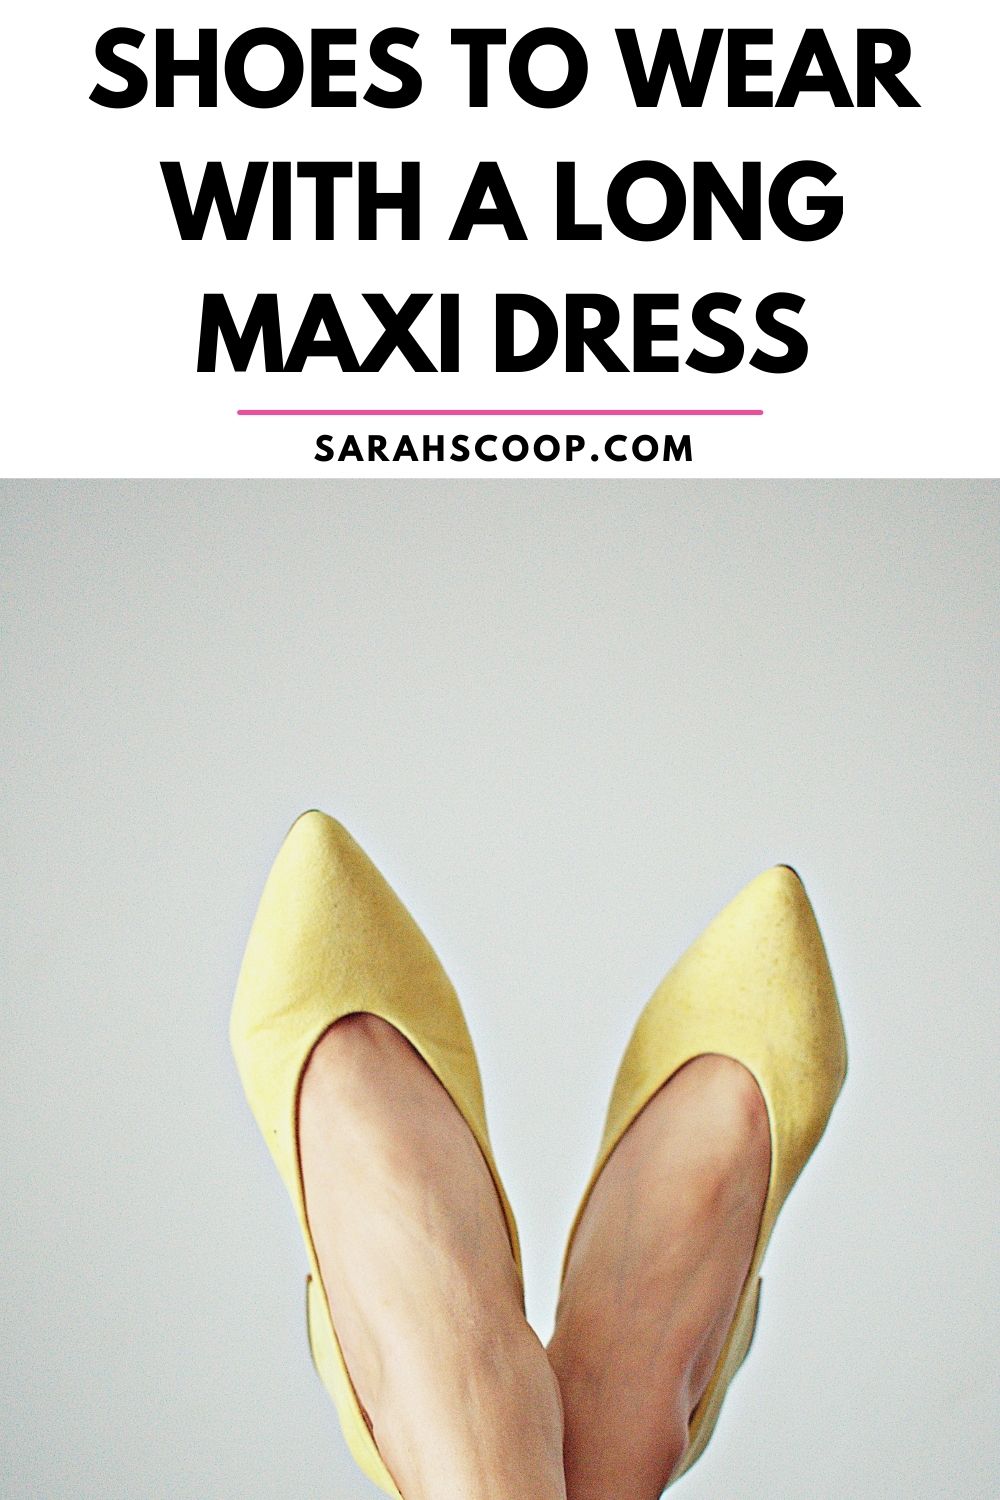 The Best Shoes To Wear With A Long Dress For Any Occasion!, 58% OFF